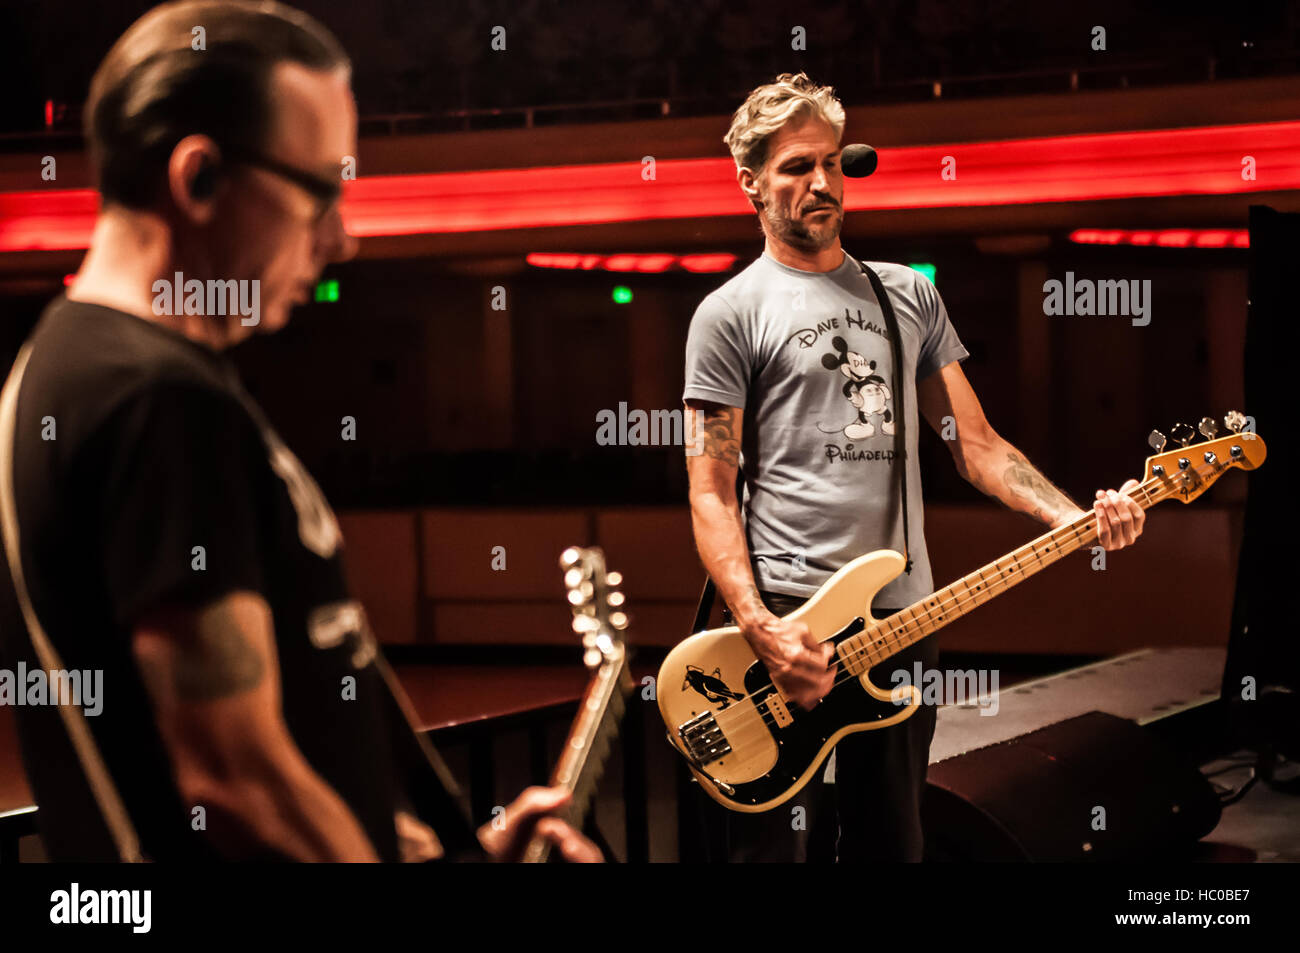 Jay Bentley and Brian Baker of Bad Religion at Soundcheck in Los Angeles at The Hollywood Palladium on the Vox Populi tour, 4th November 2016. Stock Photo